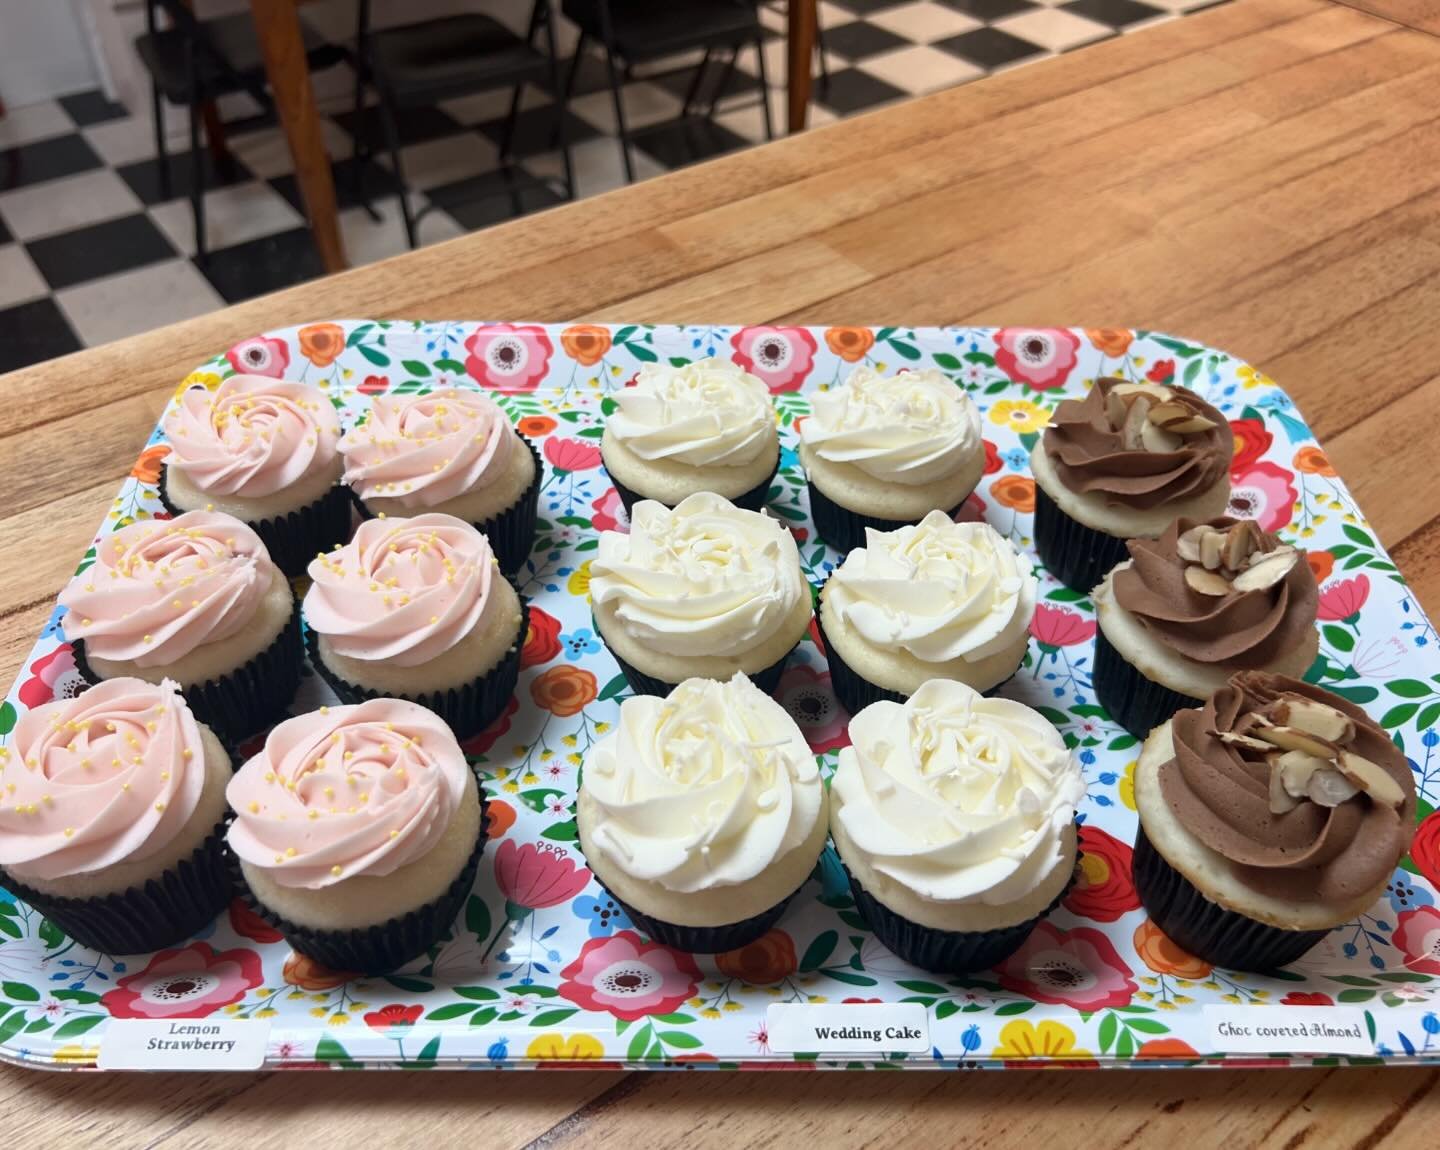 RESTOCK! 🗣️ We have Chocolate Covered Almond, Lemon Strawberry and Wedding Cake restocked at the @lorenacheesehouse today! Swing by and grab yourself a treat 😋 
102 E Center St, Lorena. Open Mon-Sat, 10-6

#lorenacheesehouse #johnsonvillecakes #cup